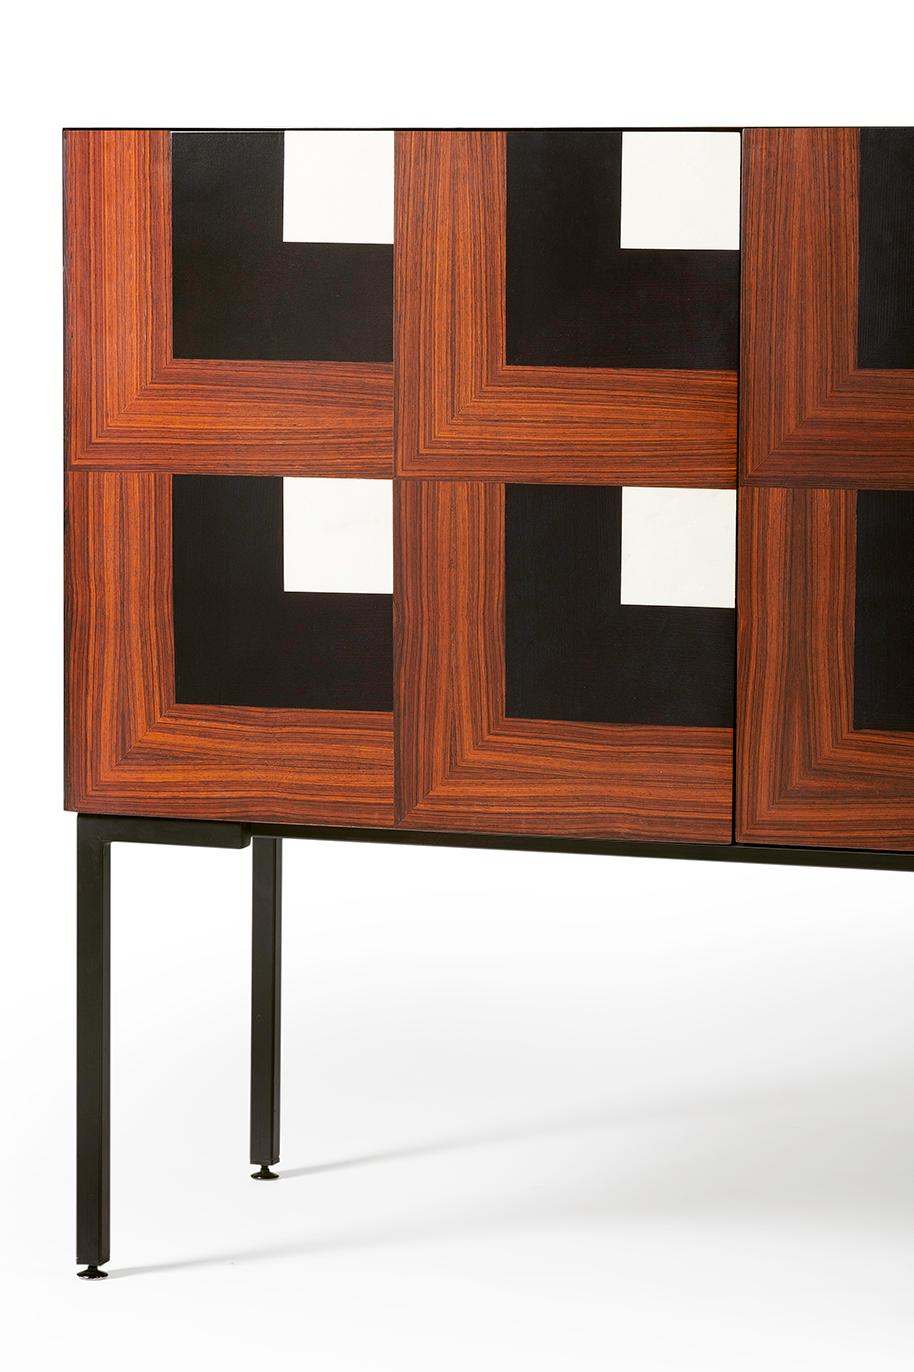 Hand-Crafted 21st Century Cubo Inlaid Sideboard in Ash, Maple, Walnut, Made in Italy, Hebanon For Sale